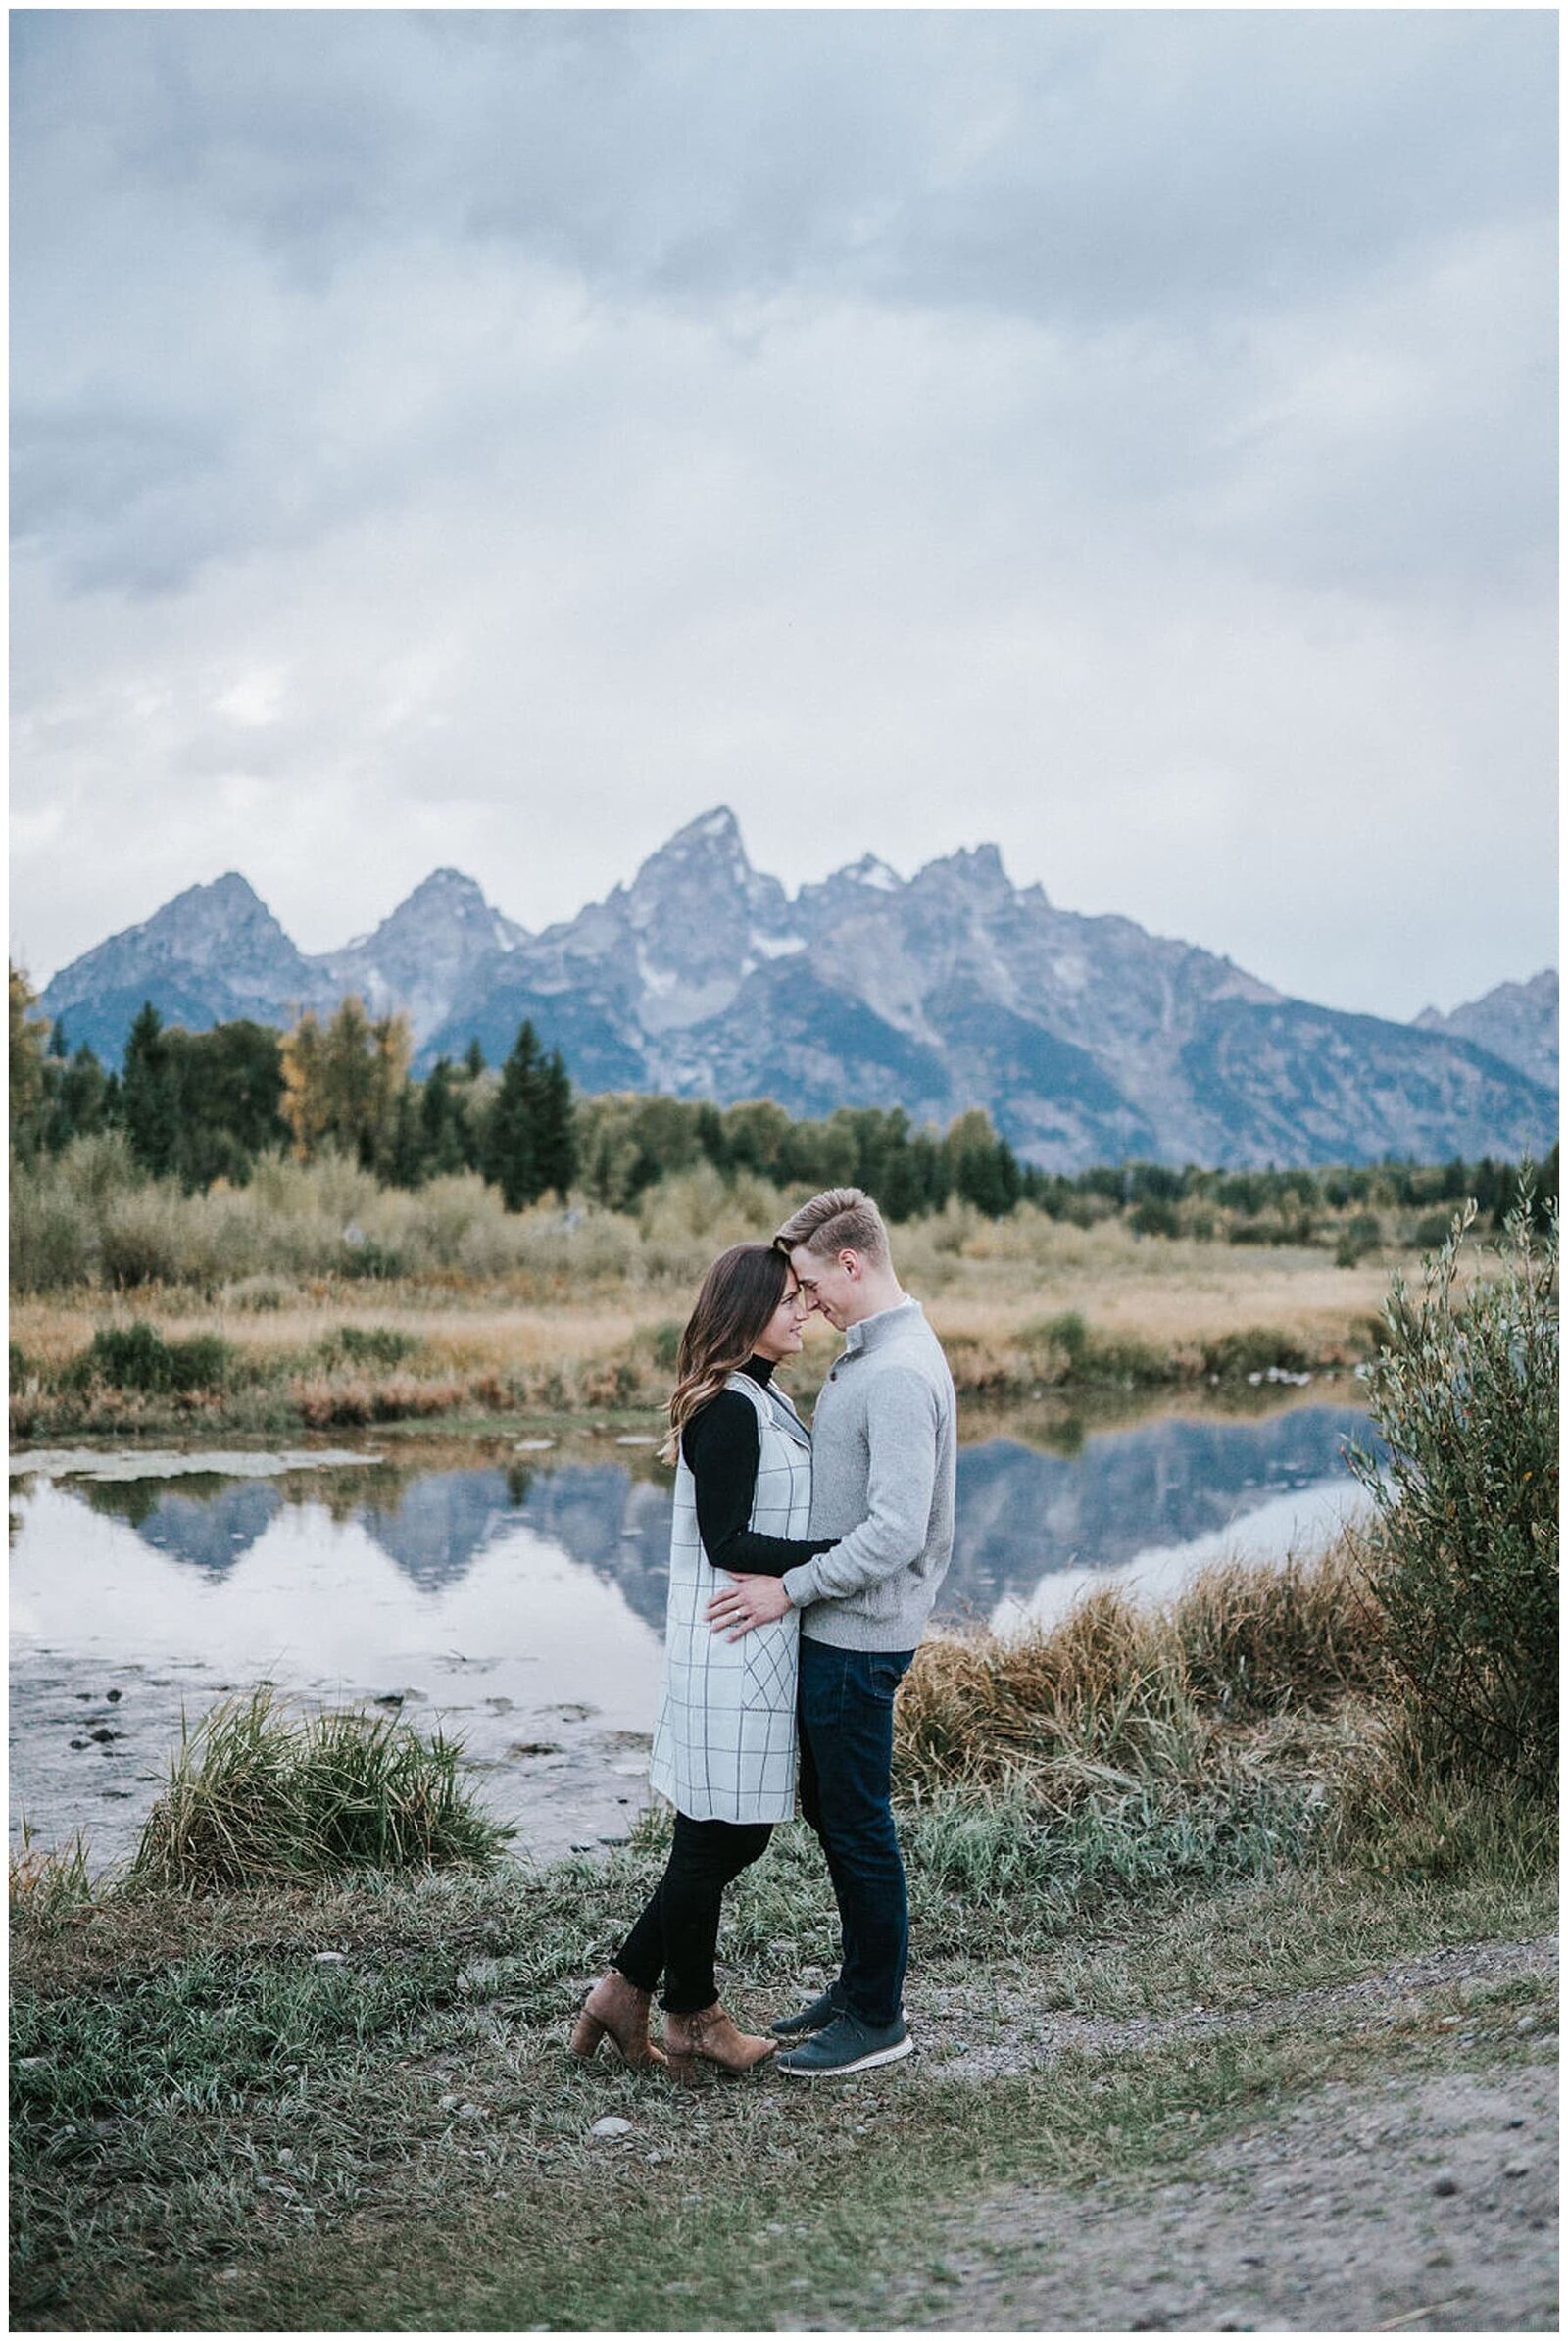 Lake Tahoe wedding photographer captures couple hugging during outdoor engagements